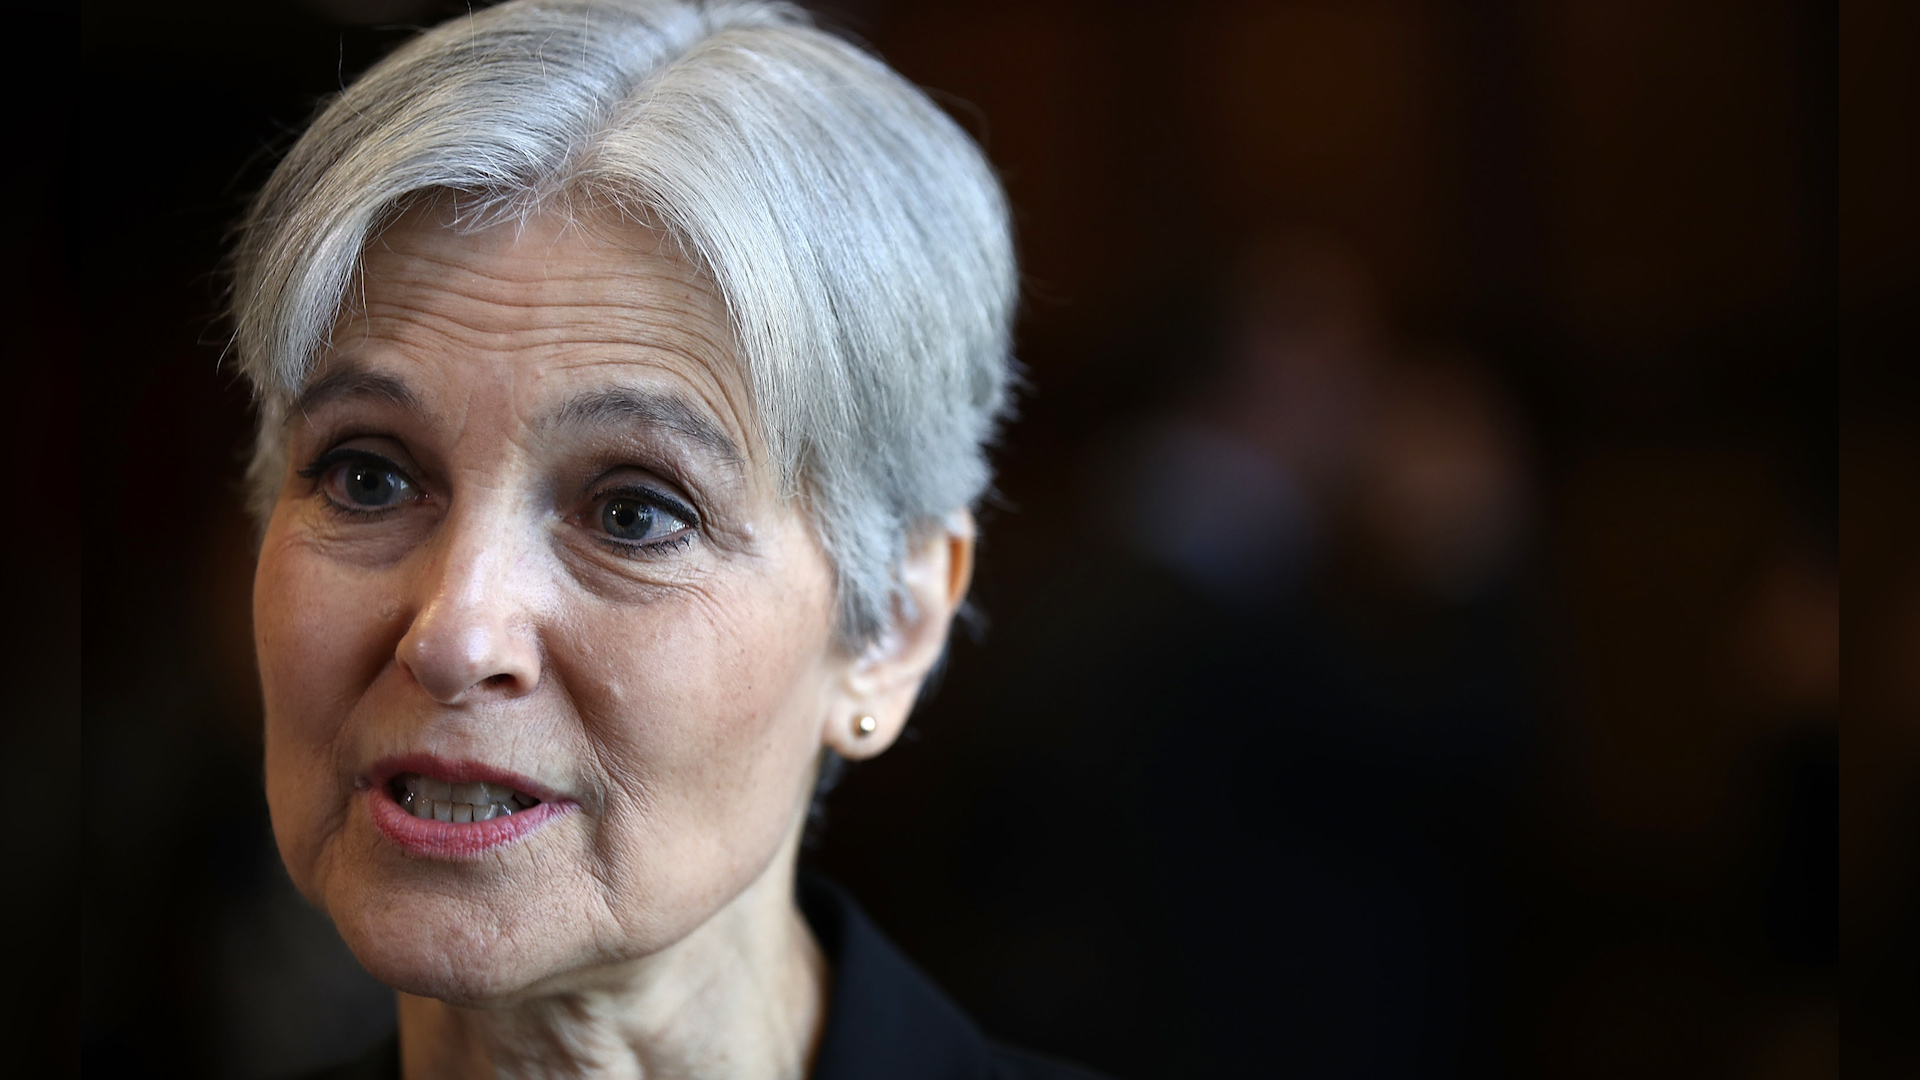 Dr. JILL STEIN ON RISING: Biden Is DOOMED to Lose to Trump